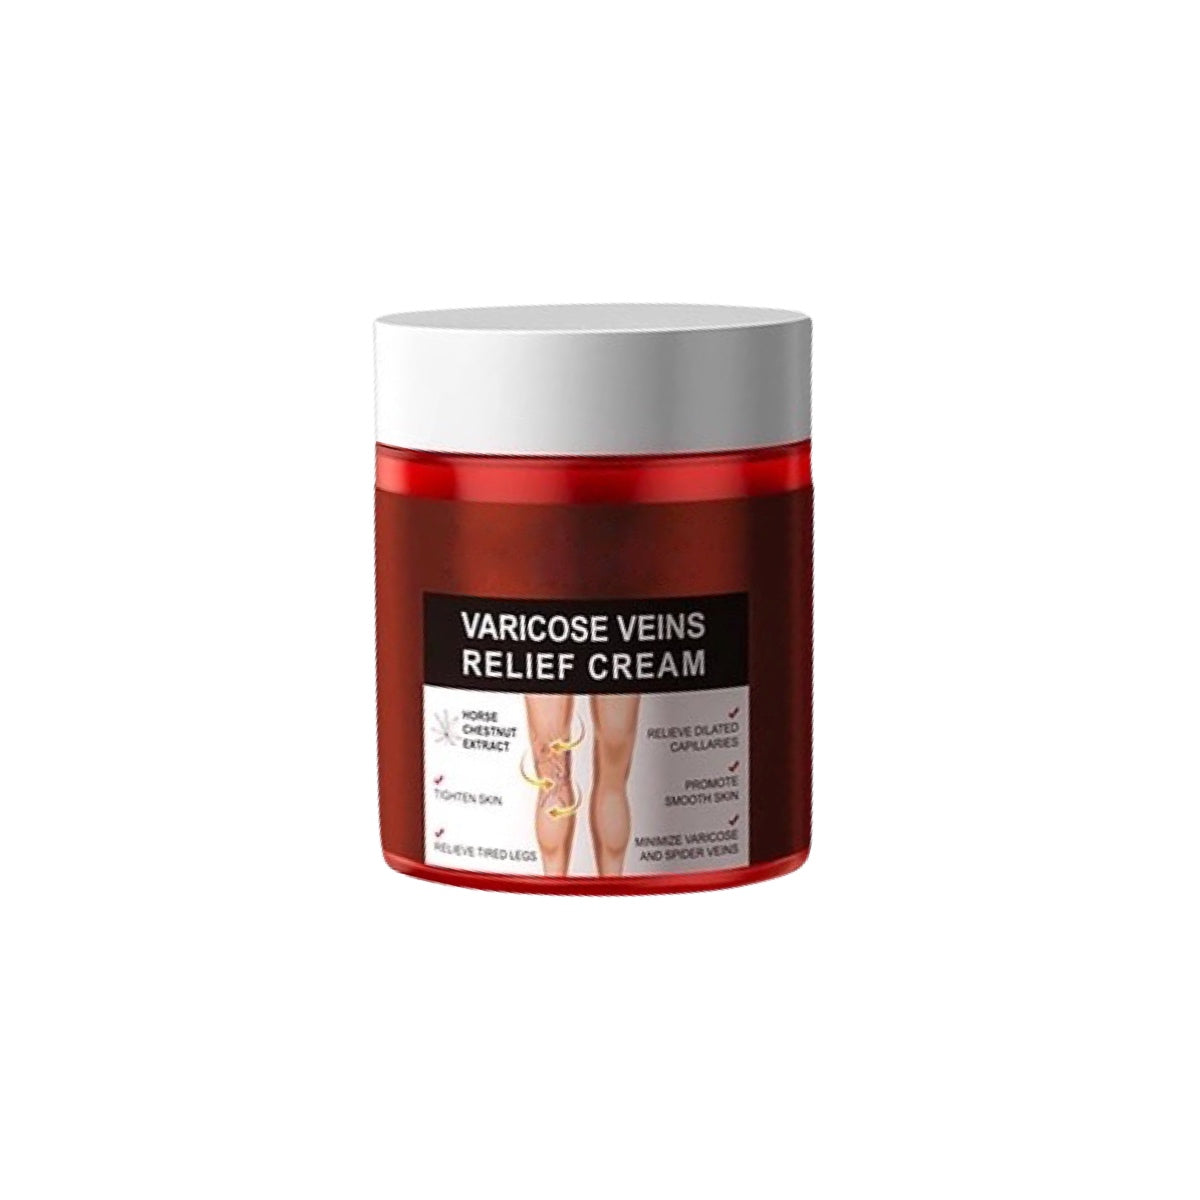 Varicose Veins Relief Cream - Limited Availability!